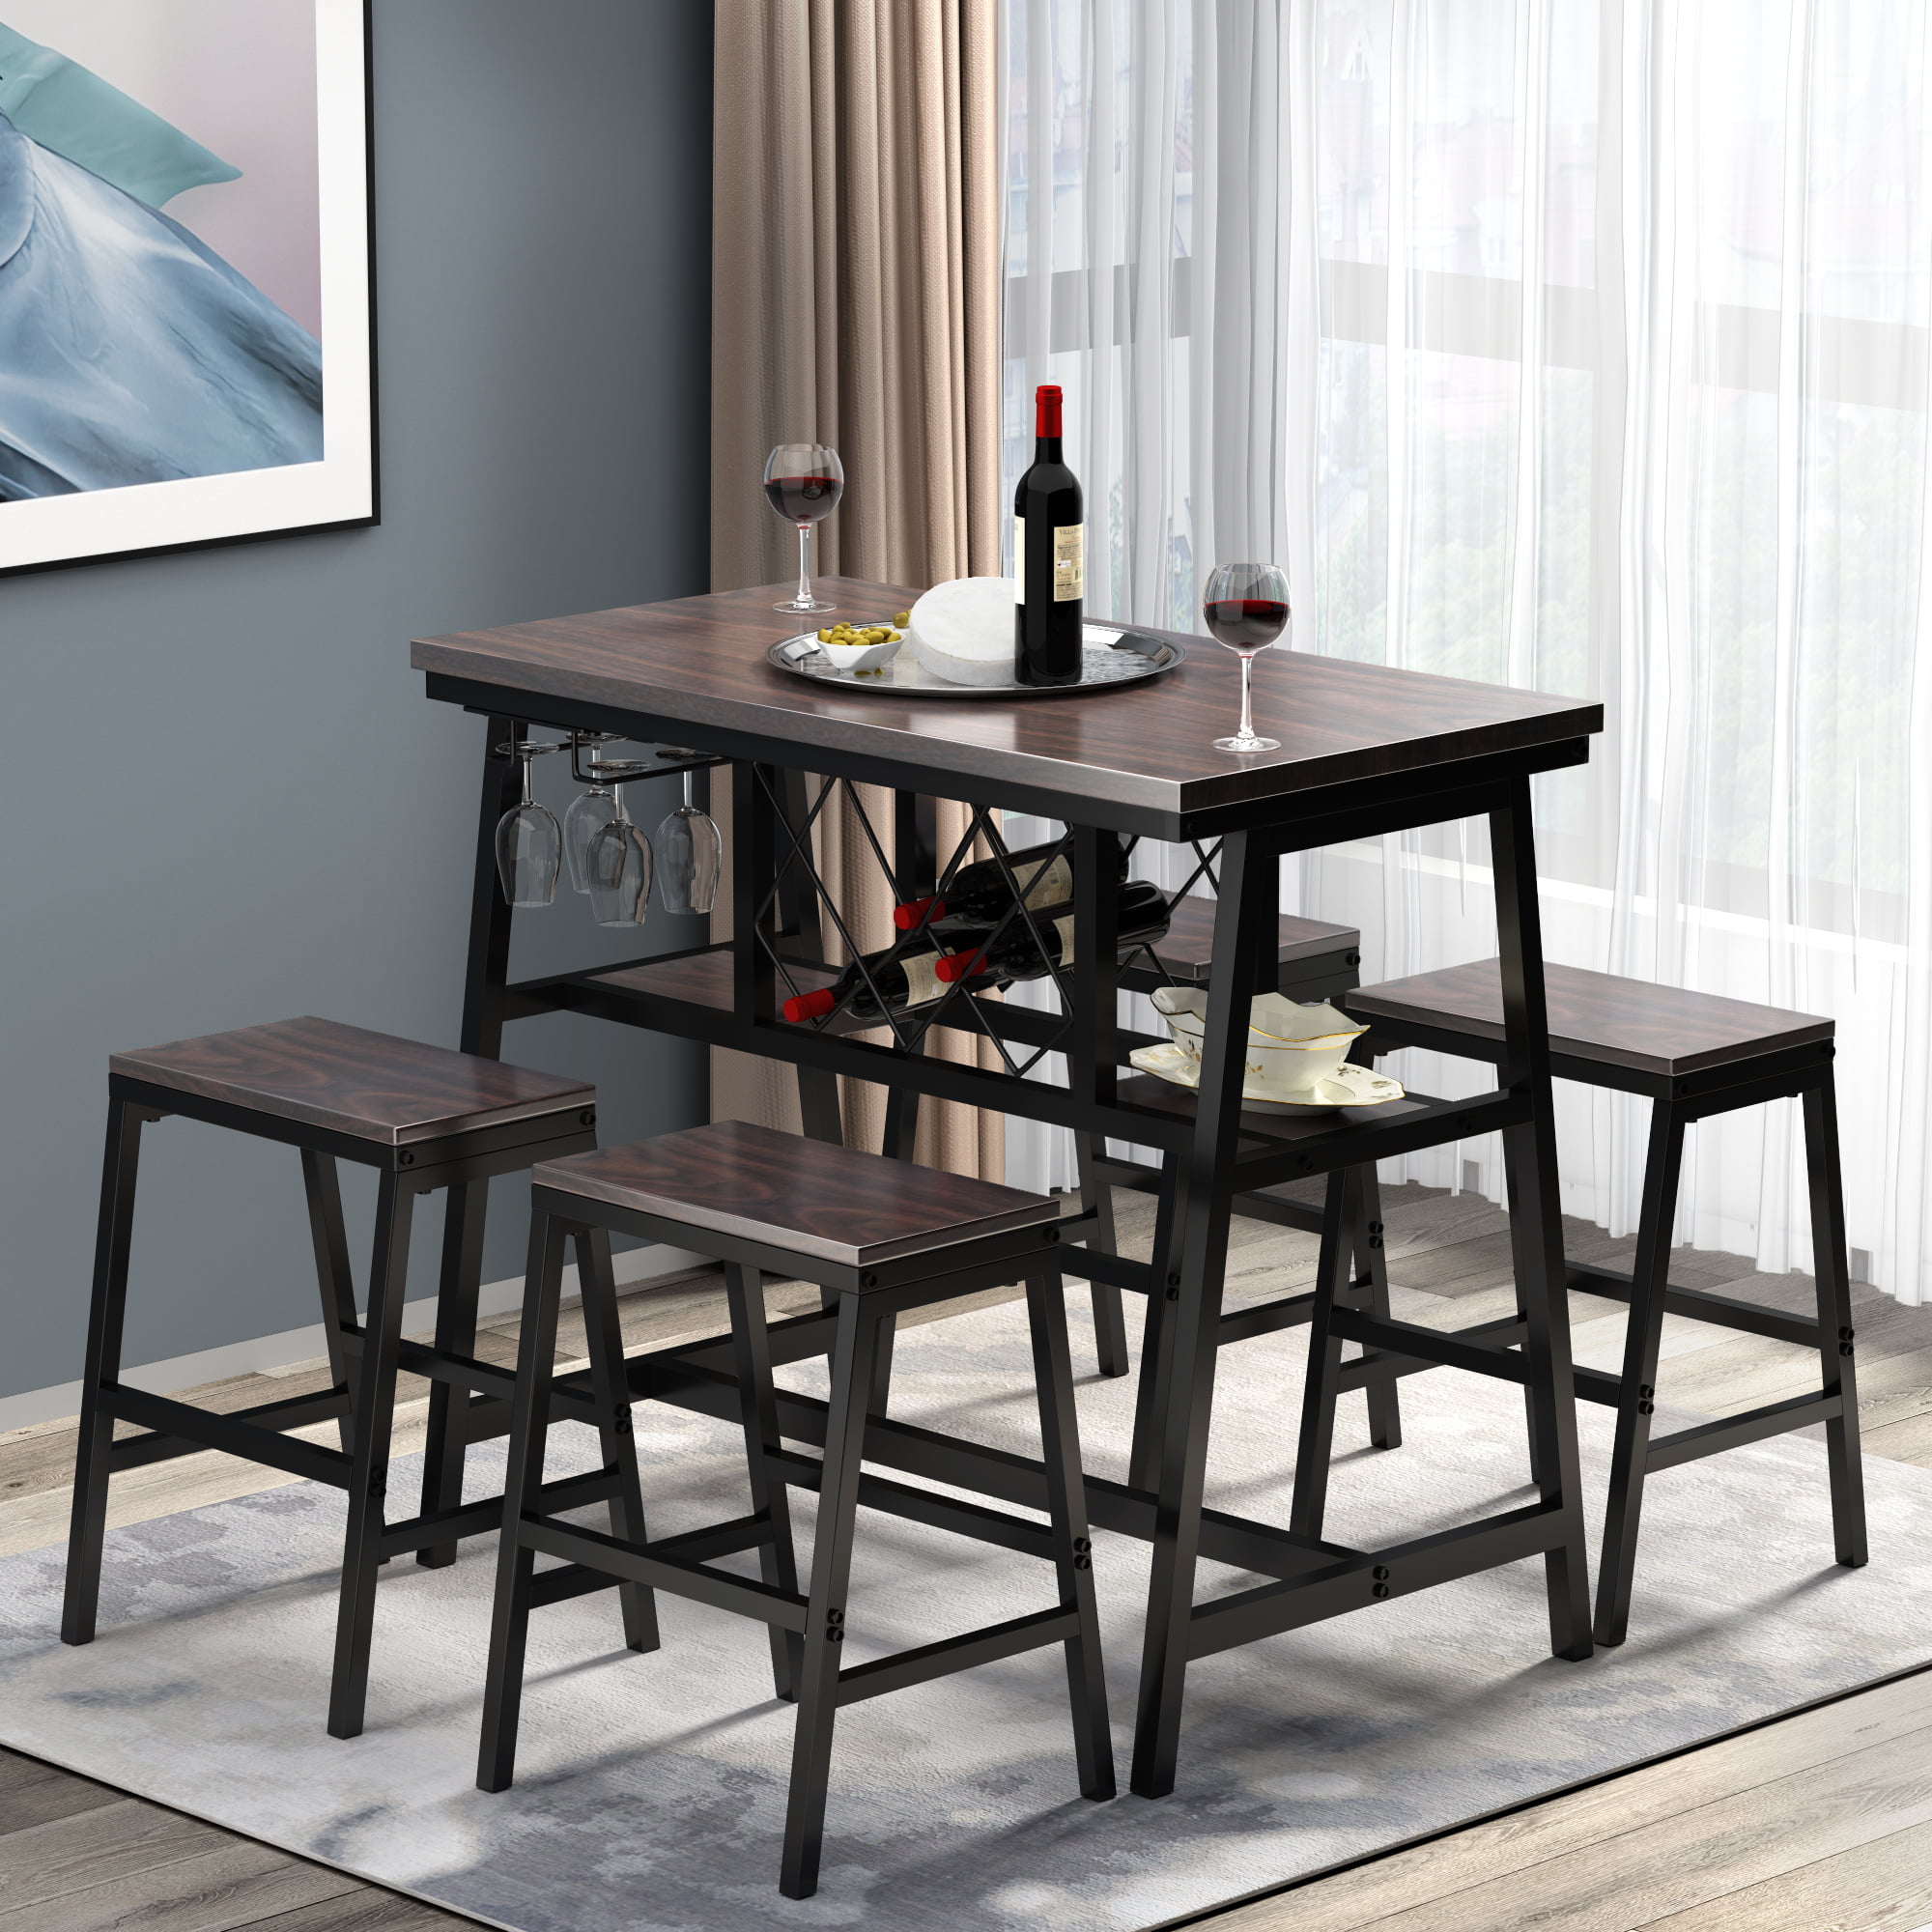 5 Piece Counter Height Table Set with Wine Rack and Glass ...